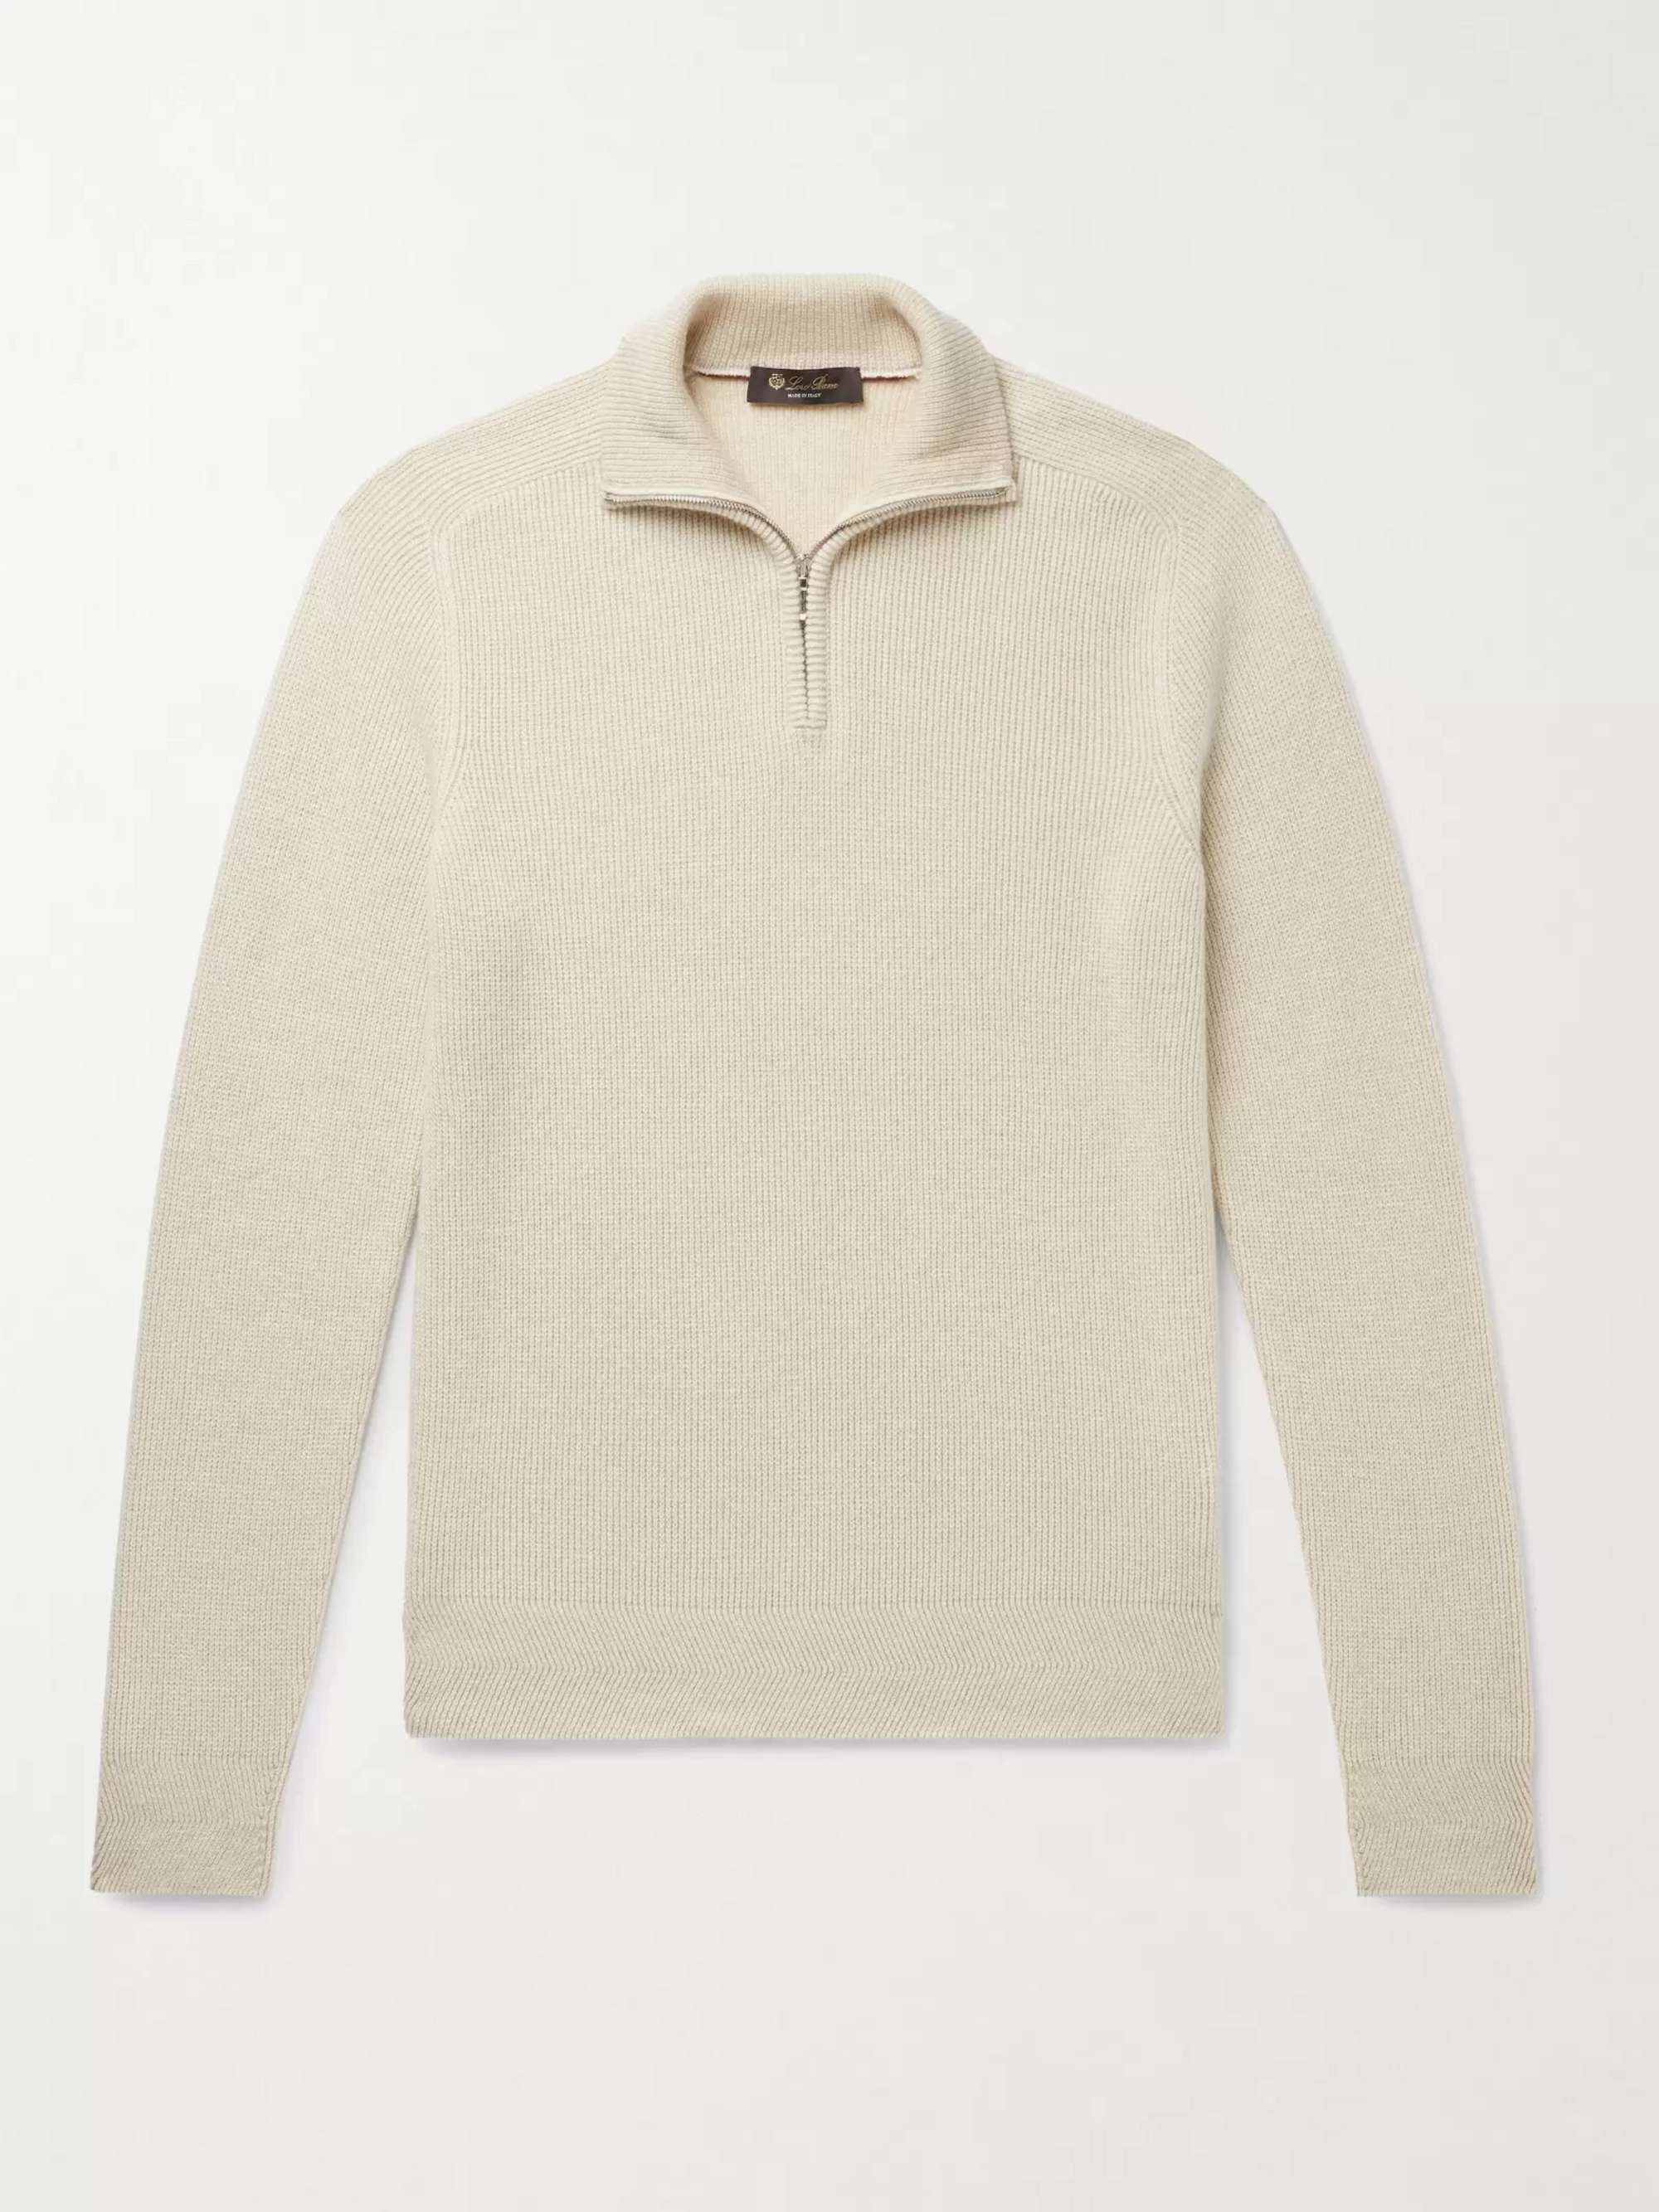 Loro Piana Suede-trimmed Cashmere Half-zip Sweater in Natural for Men Mens Clothing Sweaters and knitwear Zipped sweaters 